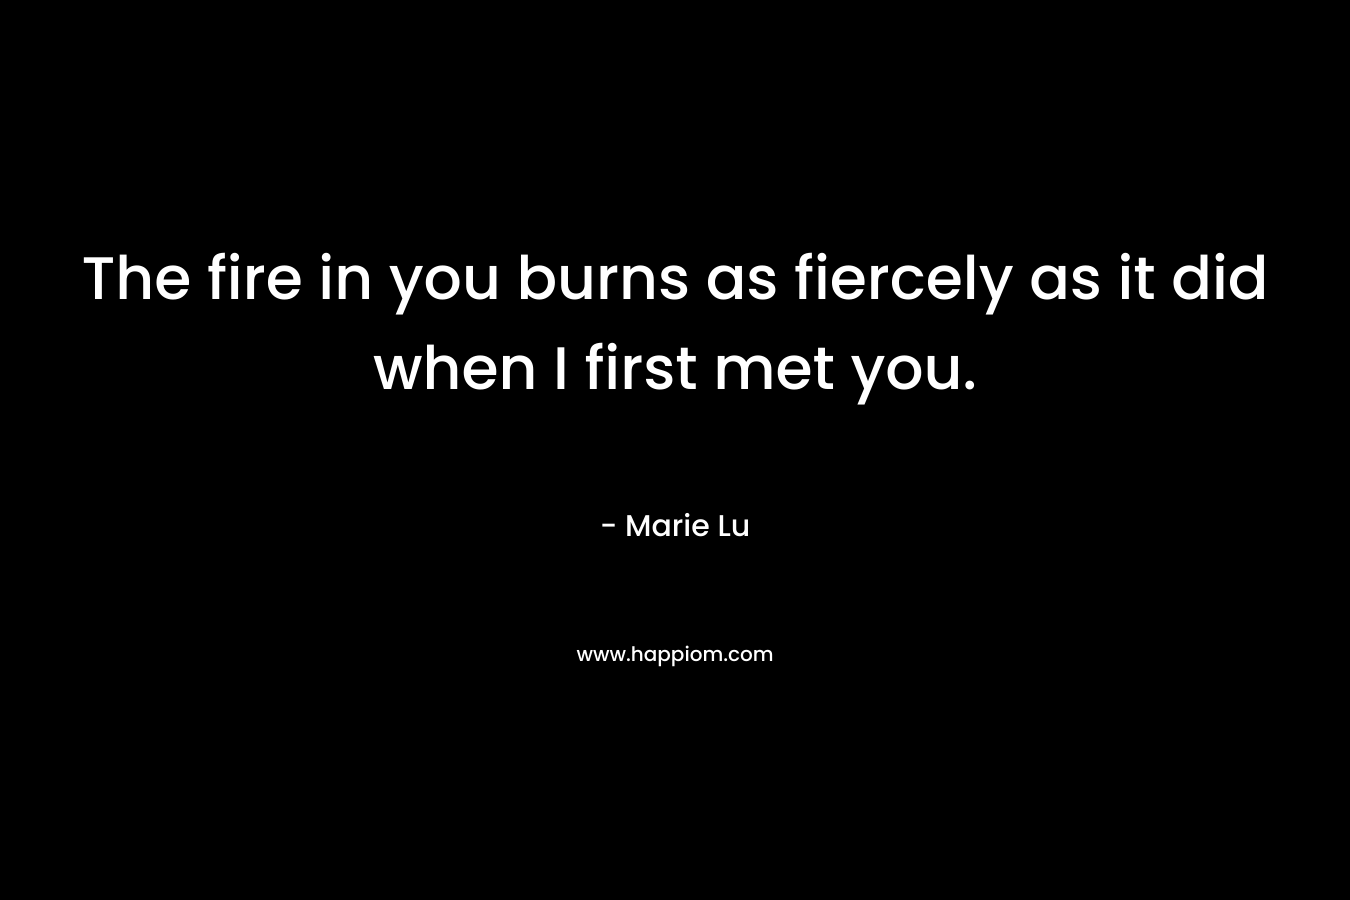 The fire in you burns as fiercely as it did when I first met you. – Marie Lu